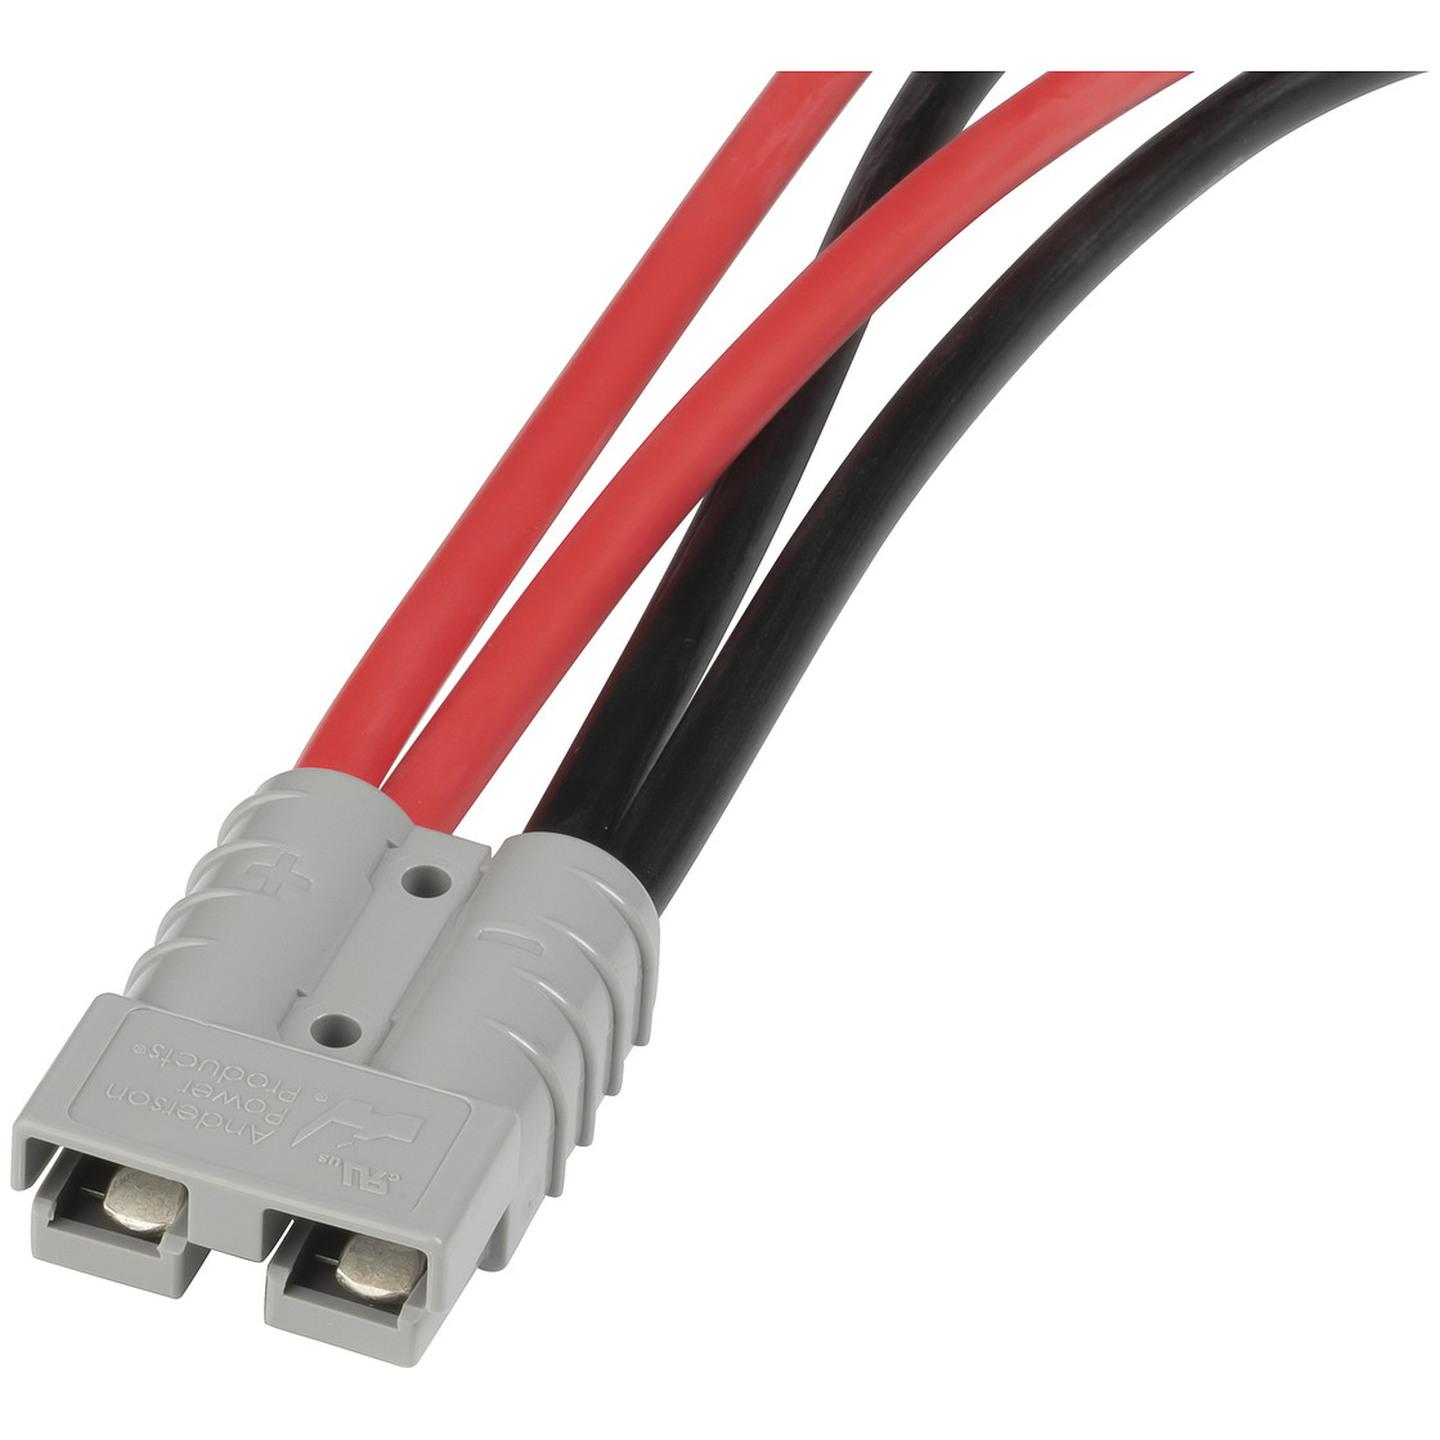 High Current Connector Piggyback Cable 50A 8G R&B